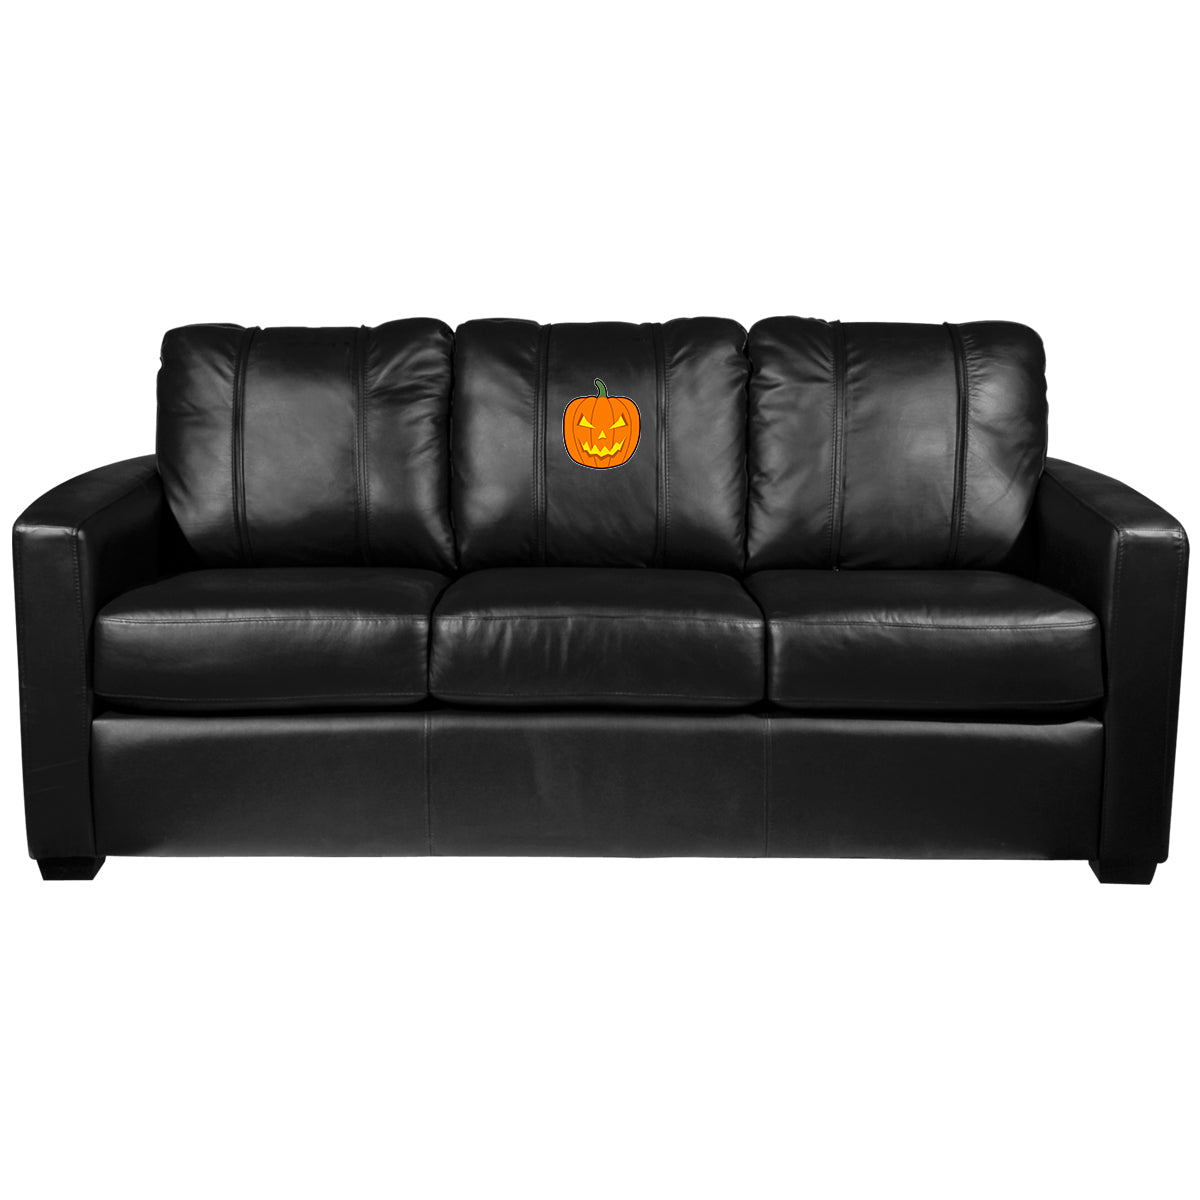 Silver Sofa with Haunting Jack Logo